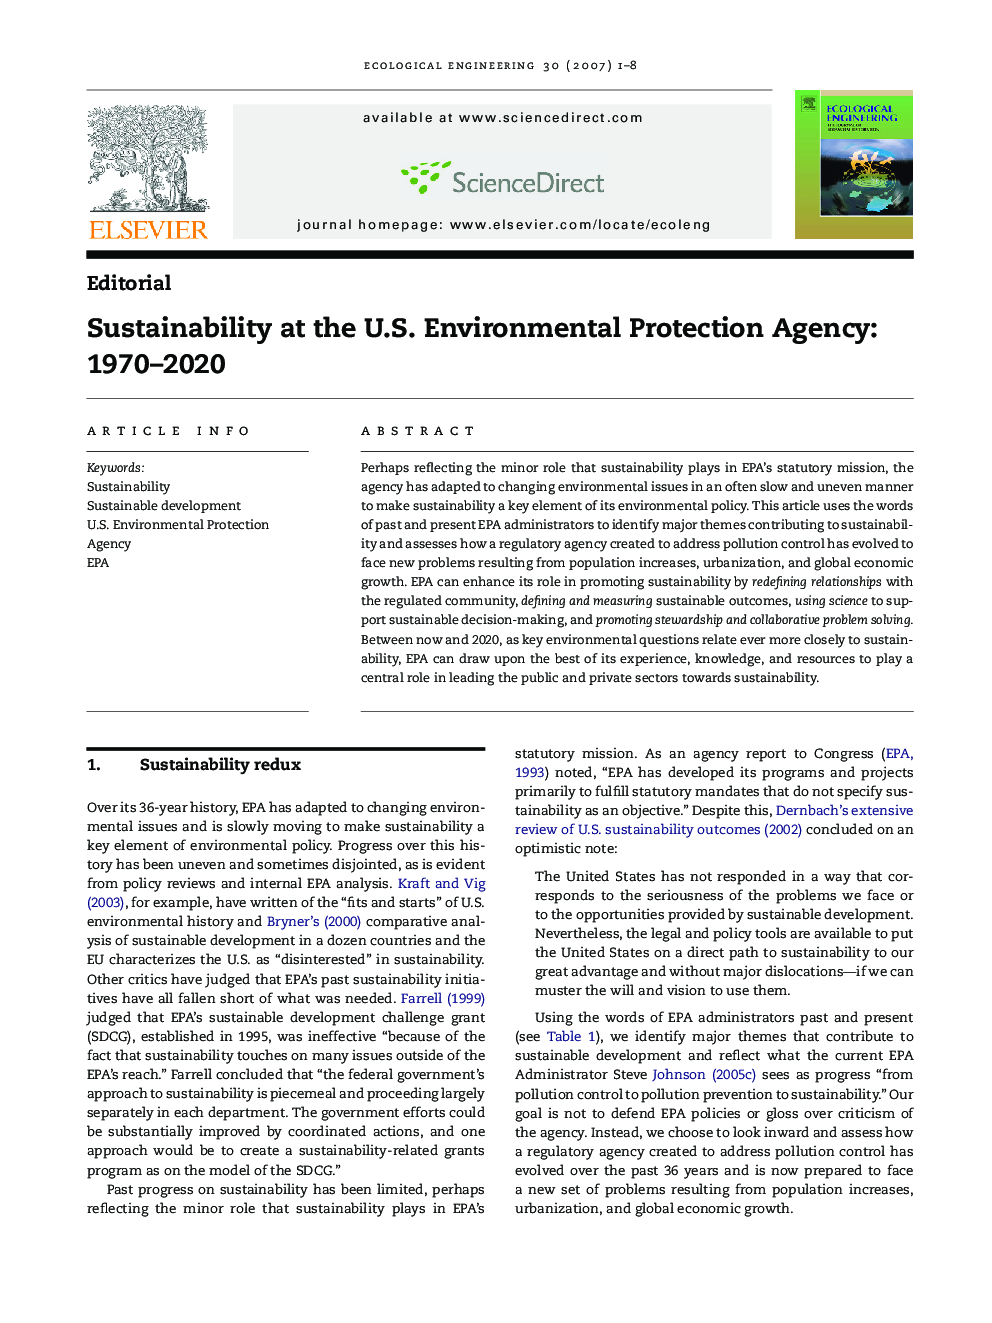 Sustainability at the U.S. Environmental Protection Agency: 1970-2020